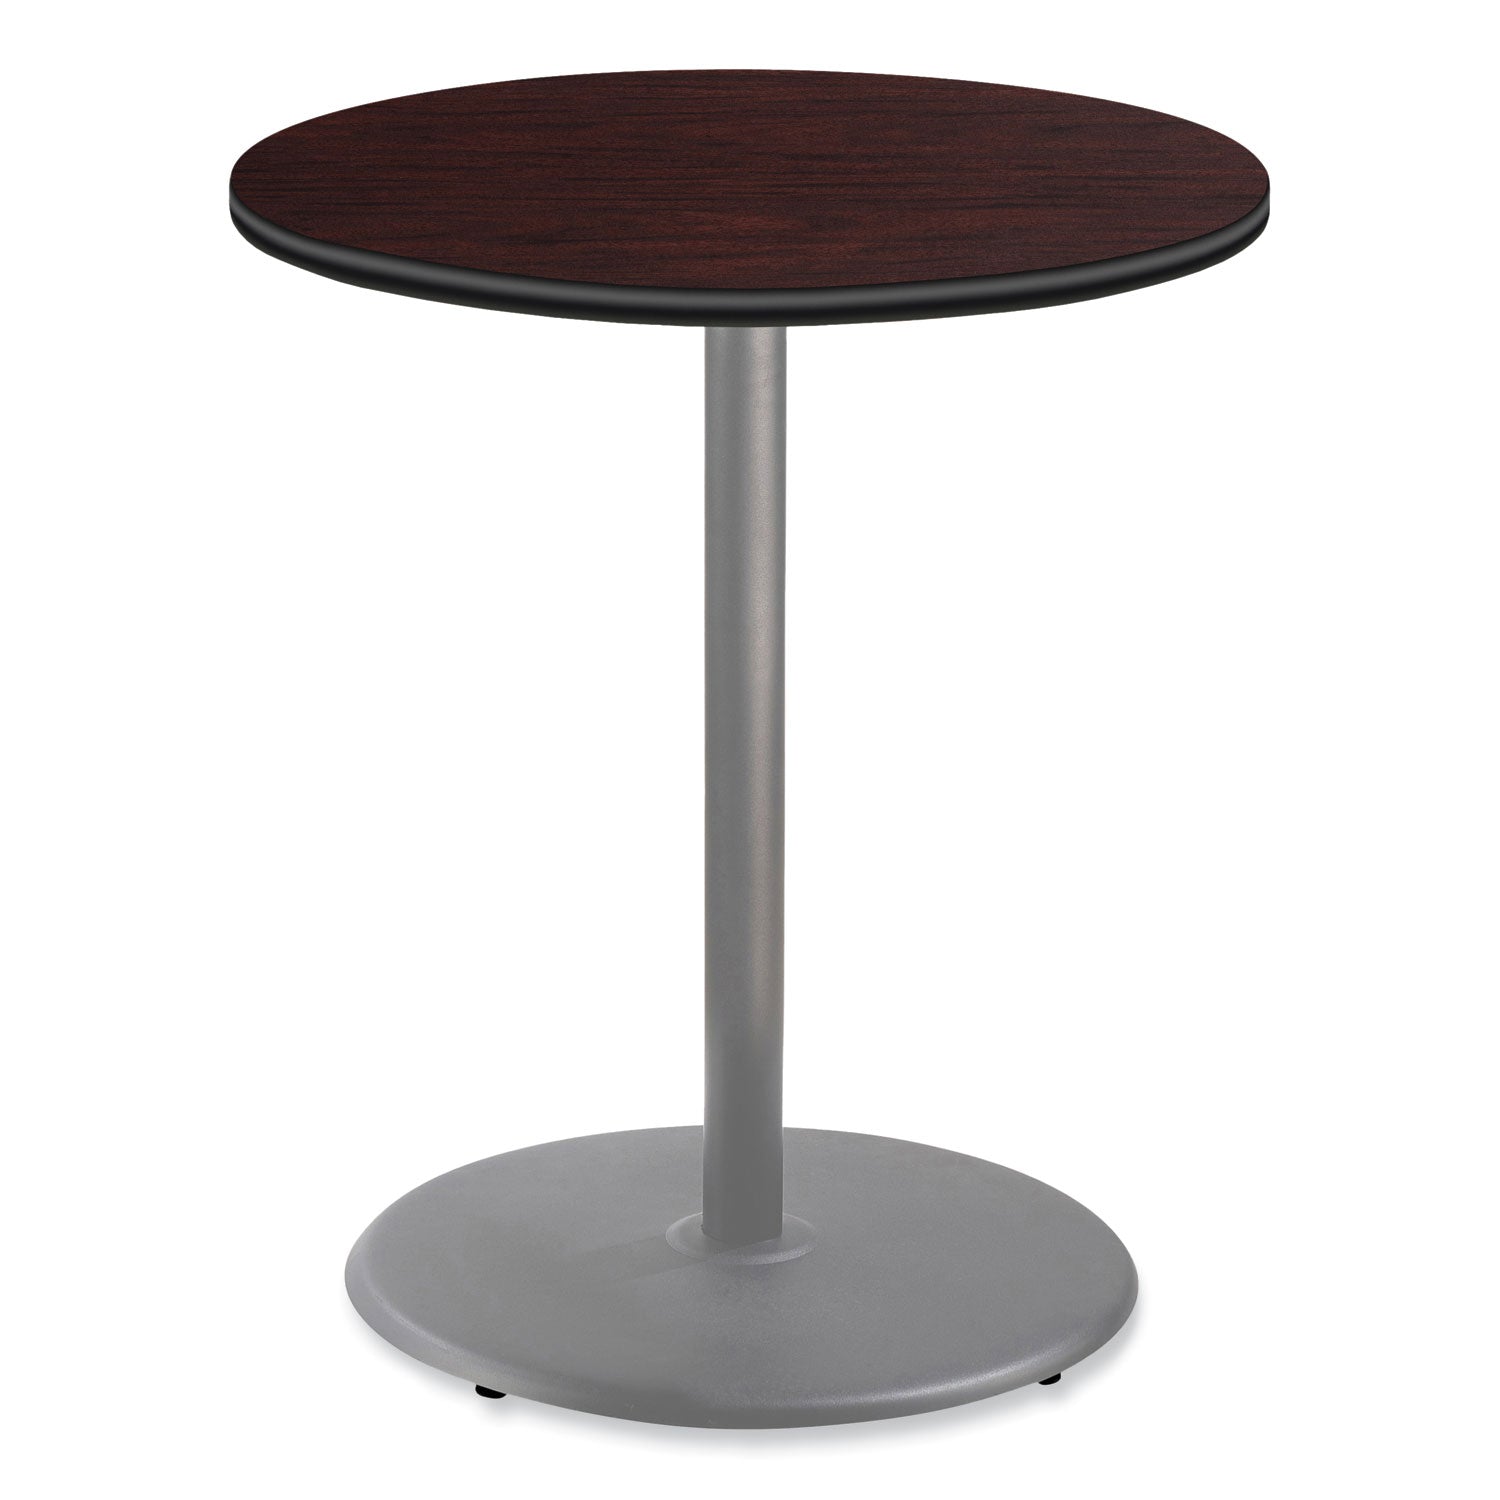 cafe-table-36-diameter-x-42h-round-top-base-mahogany-top-gray-base-ships-in-7-10-business-days_npscg13636rb1my - 1